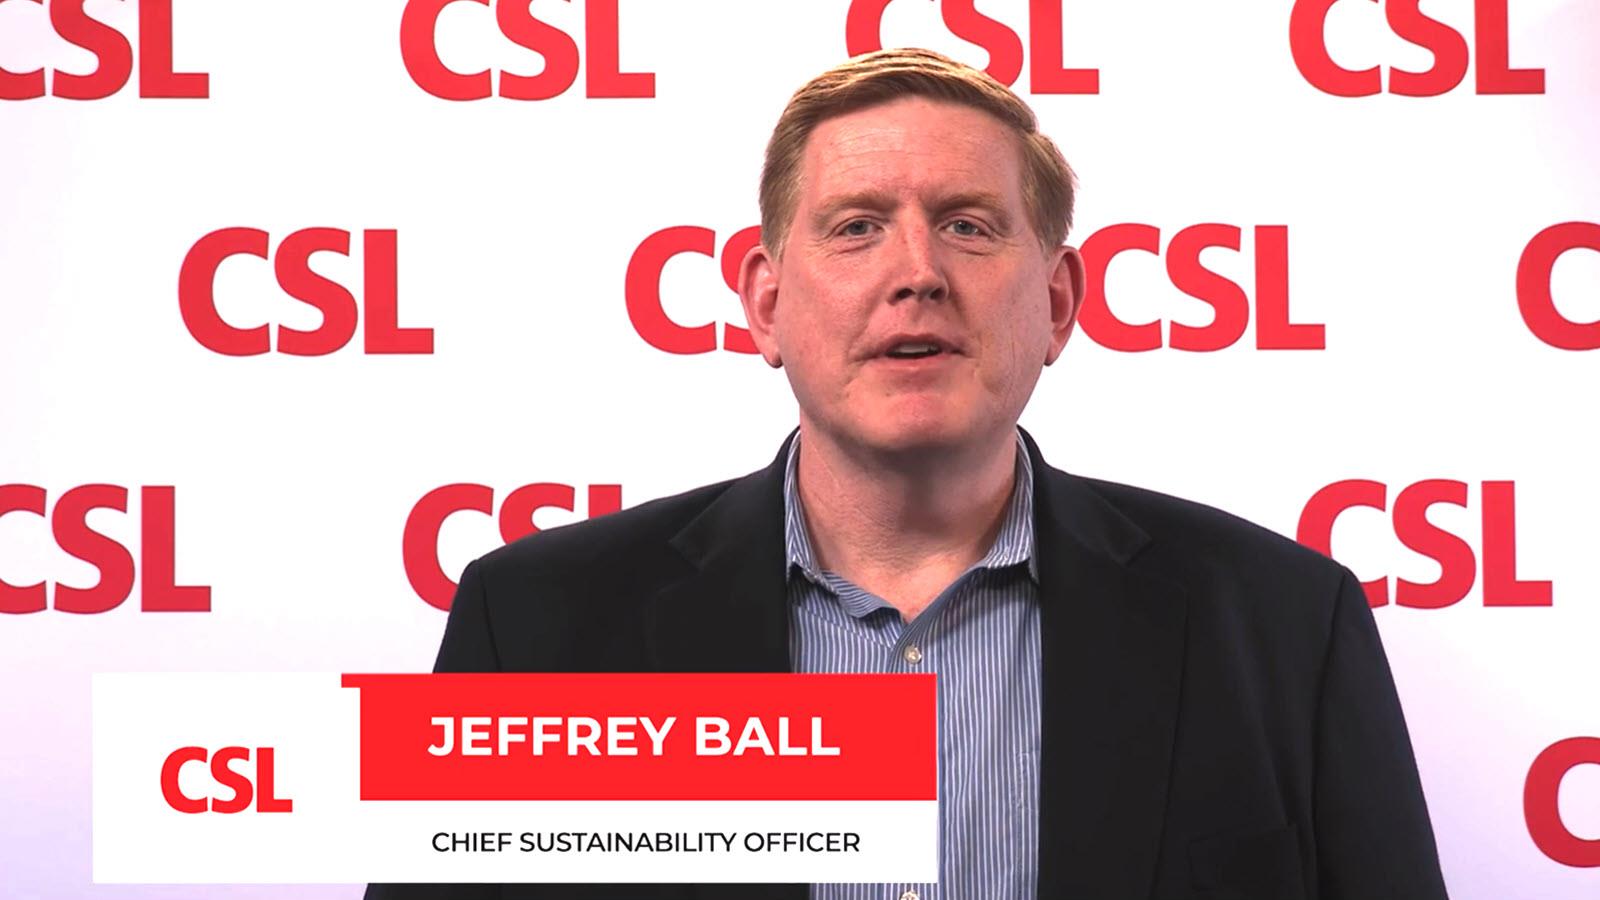 CSL Chief Sustainability Officer Jeffrey Ball